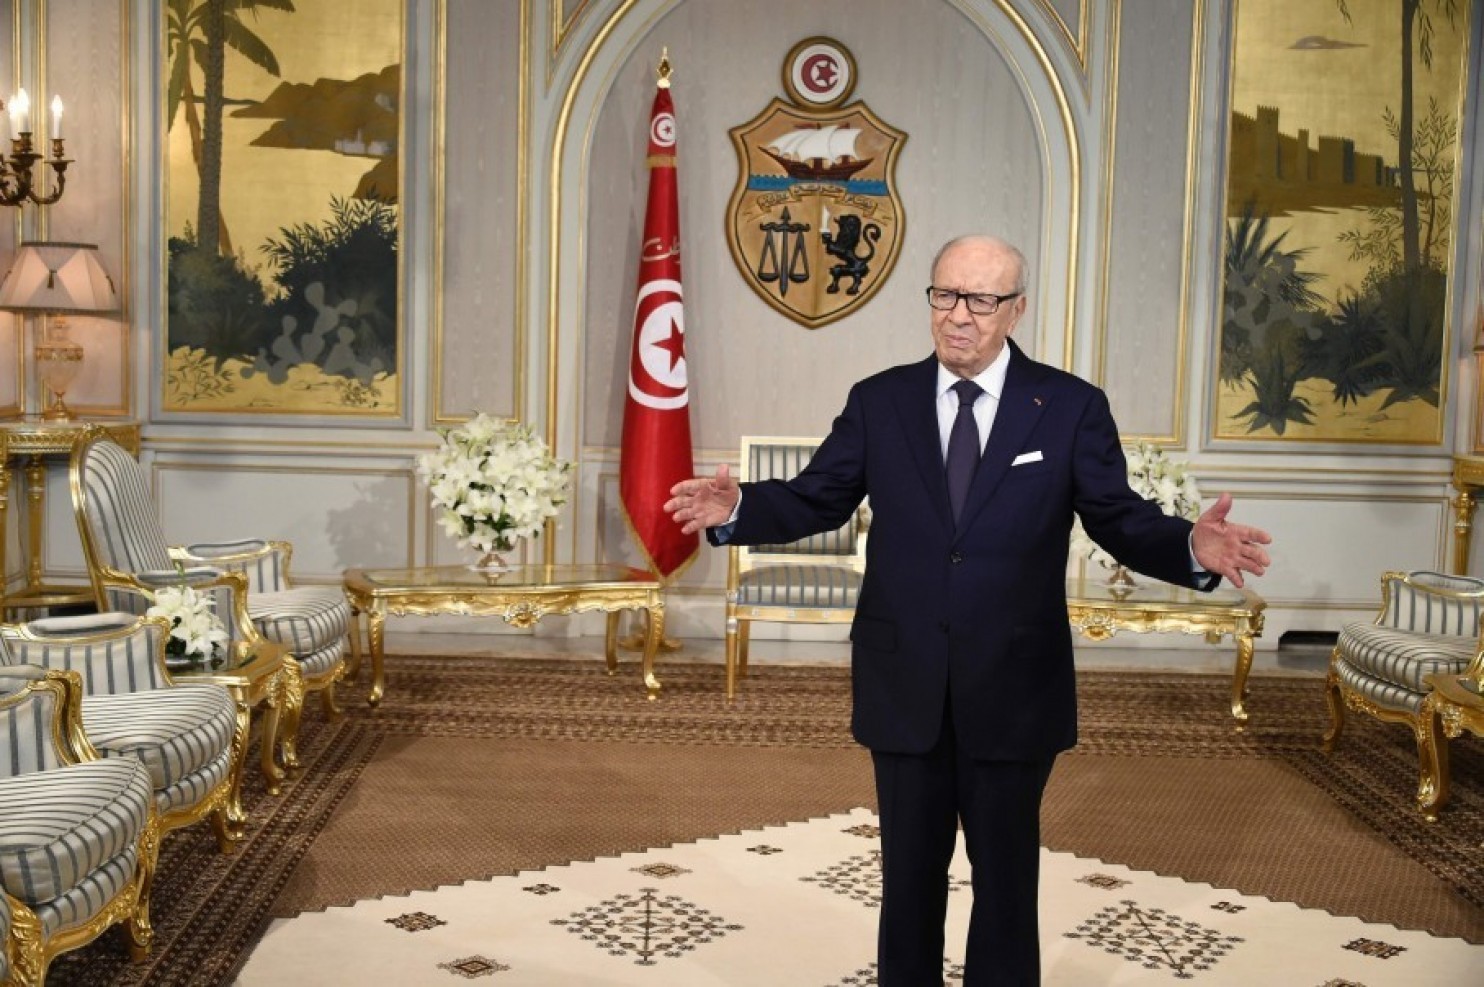 Tunisia: President Calls for National Unity to Withstand Post-Revolution Challenges